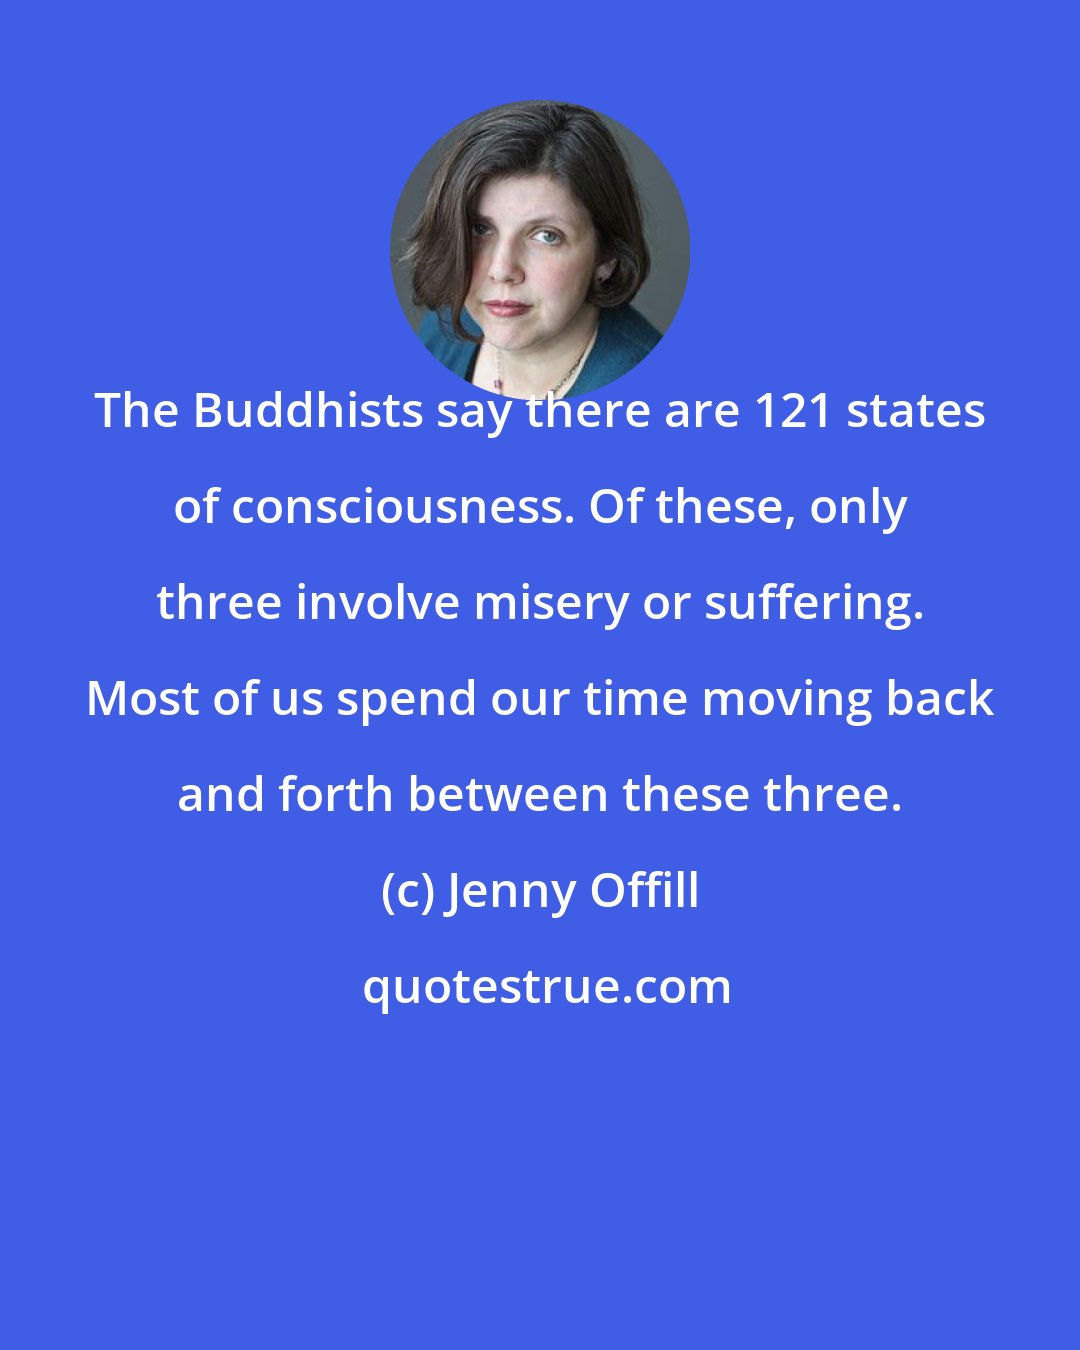 Jenny Offill: The Buddhists say there are 121 states of consciousness. Of these, only three involve misery or suffering. Most of us spend our time moving back and forth between these three.